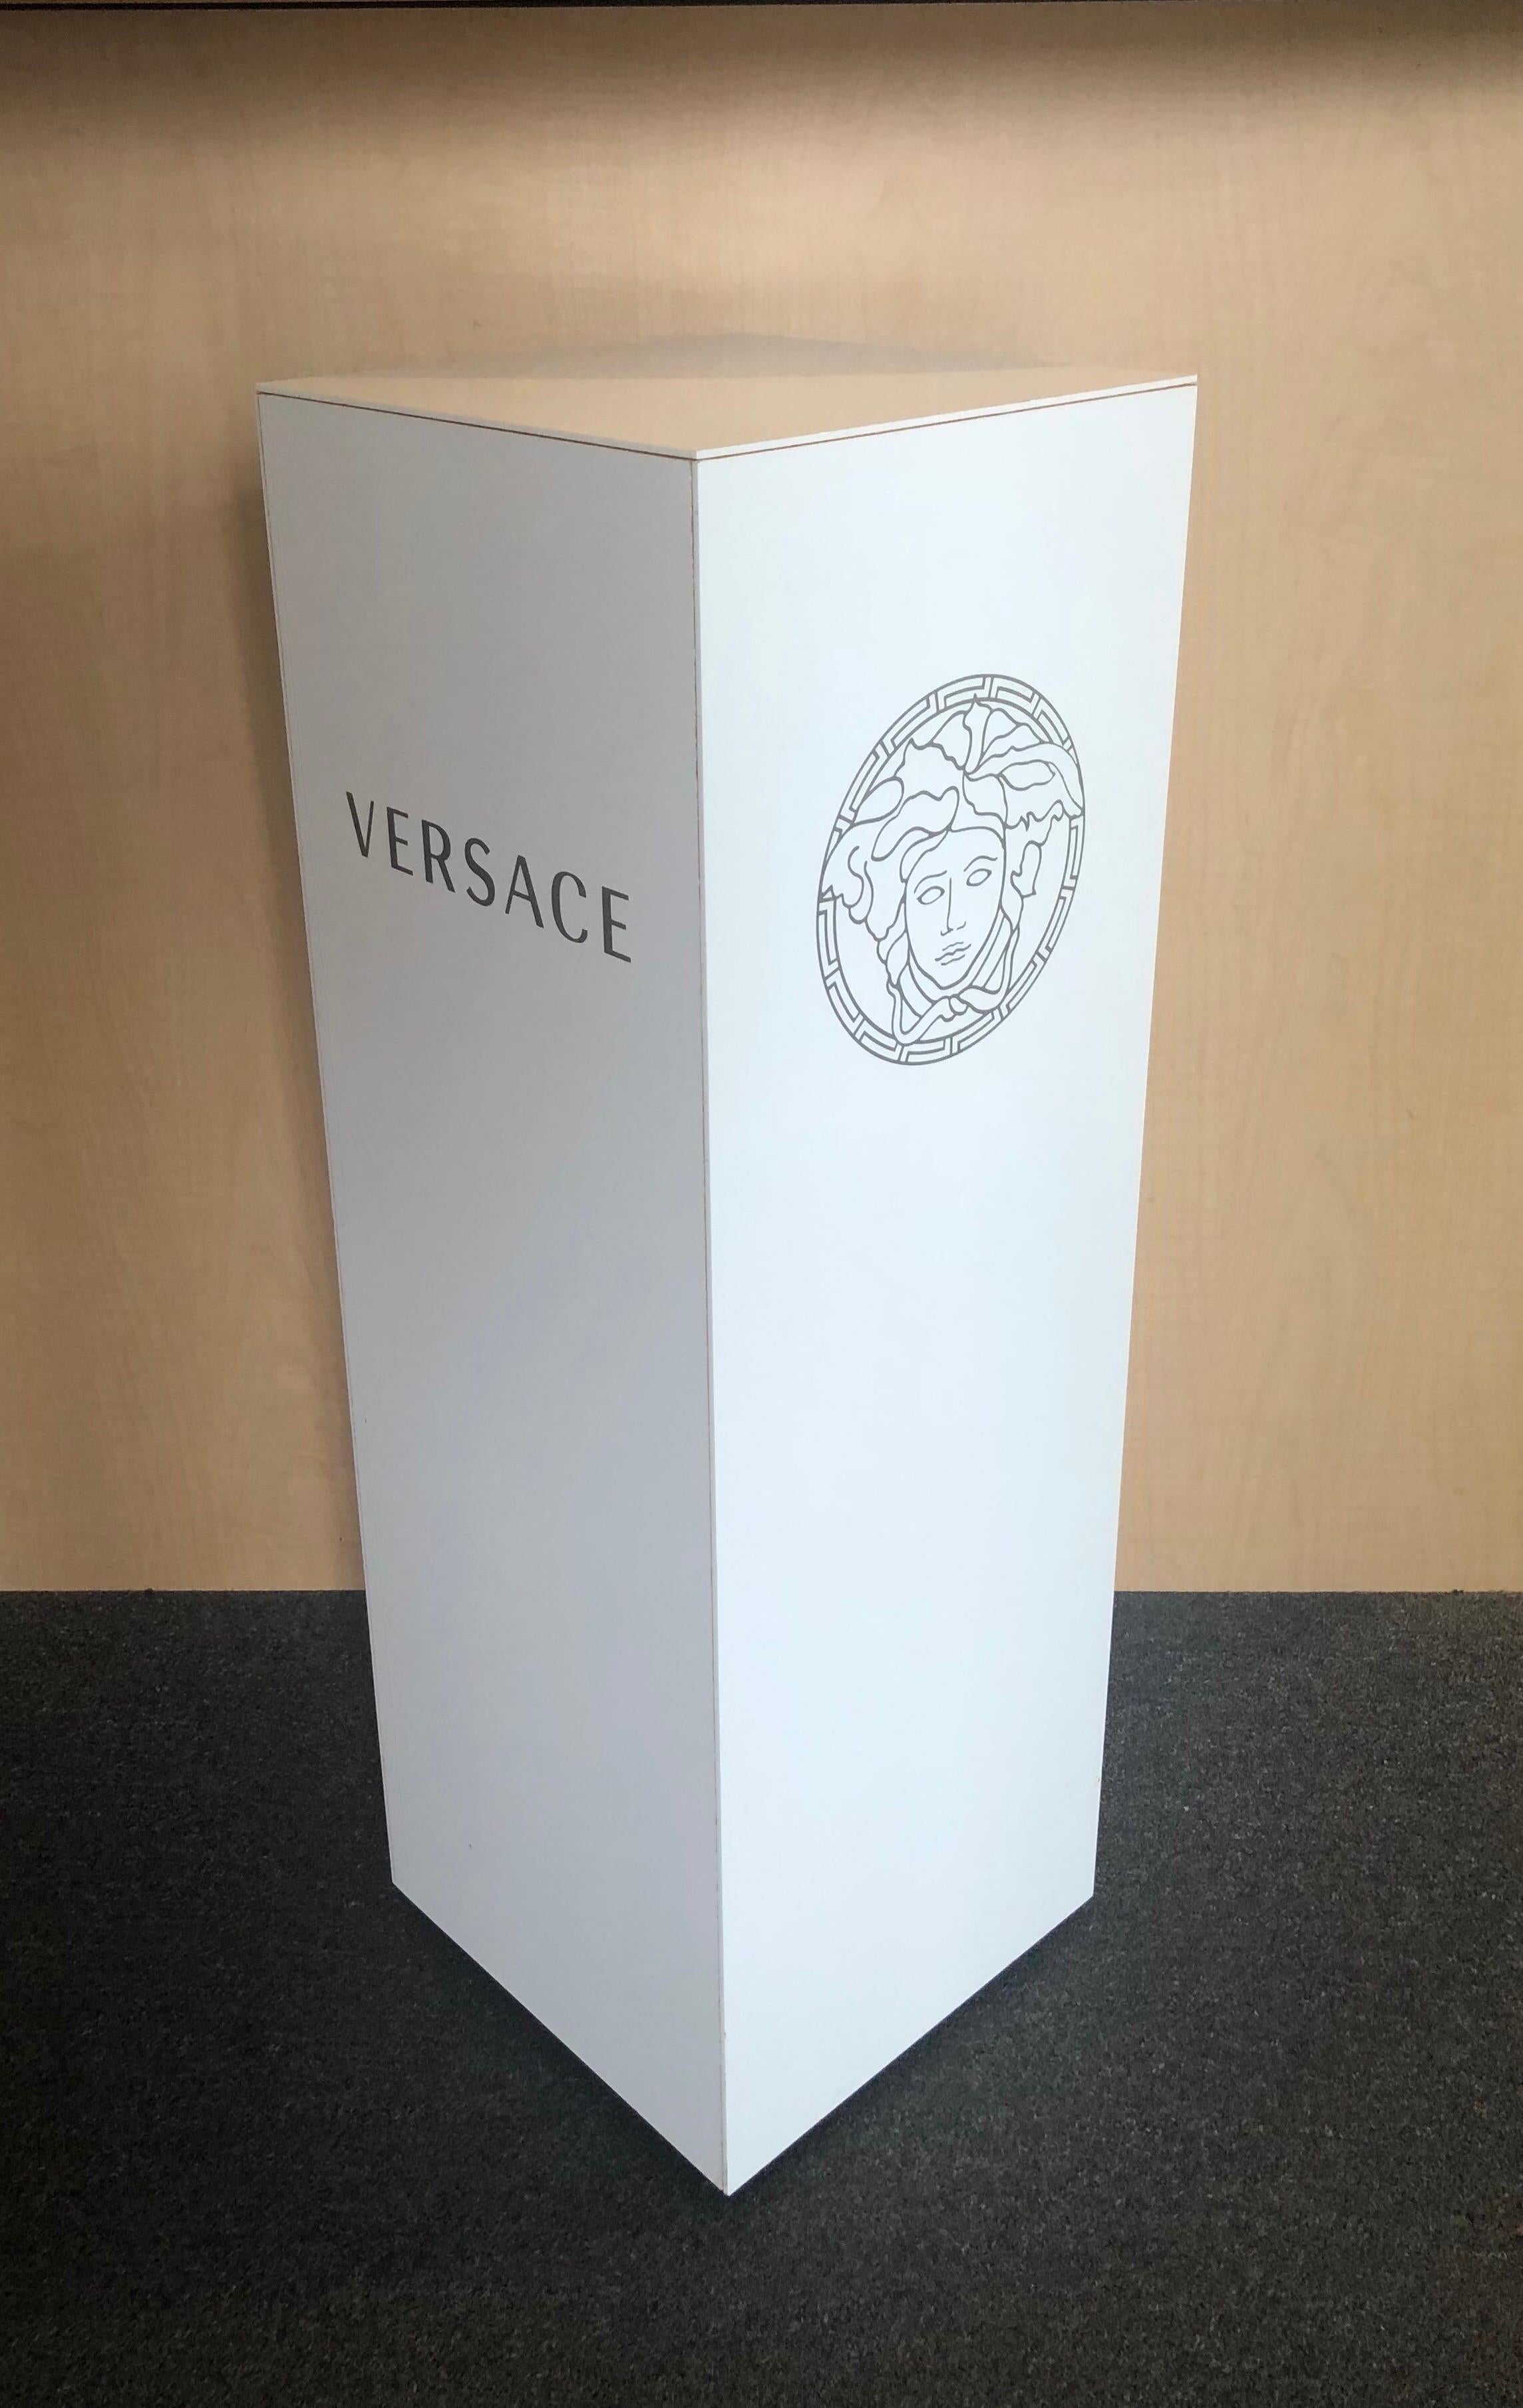 Super rare Versace logoed pedestal in white plastic laminate or melamine, circa 2000s. The piece was a former retail display at Saks Fifth Avenue in Los Angeles, CA and has either the 